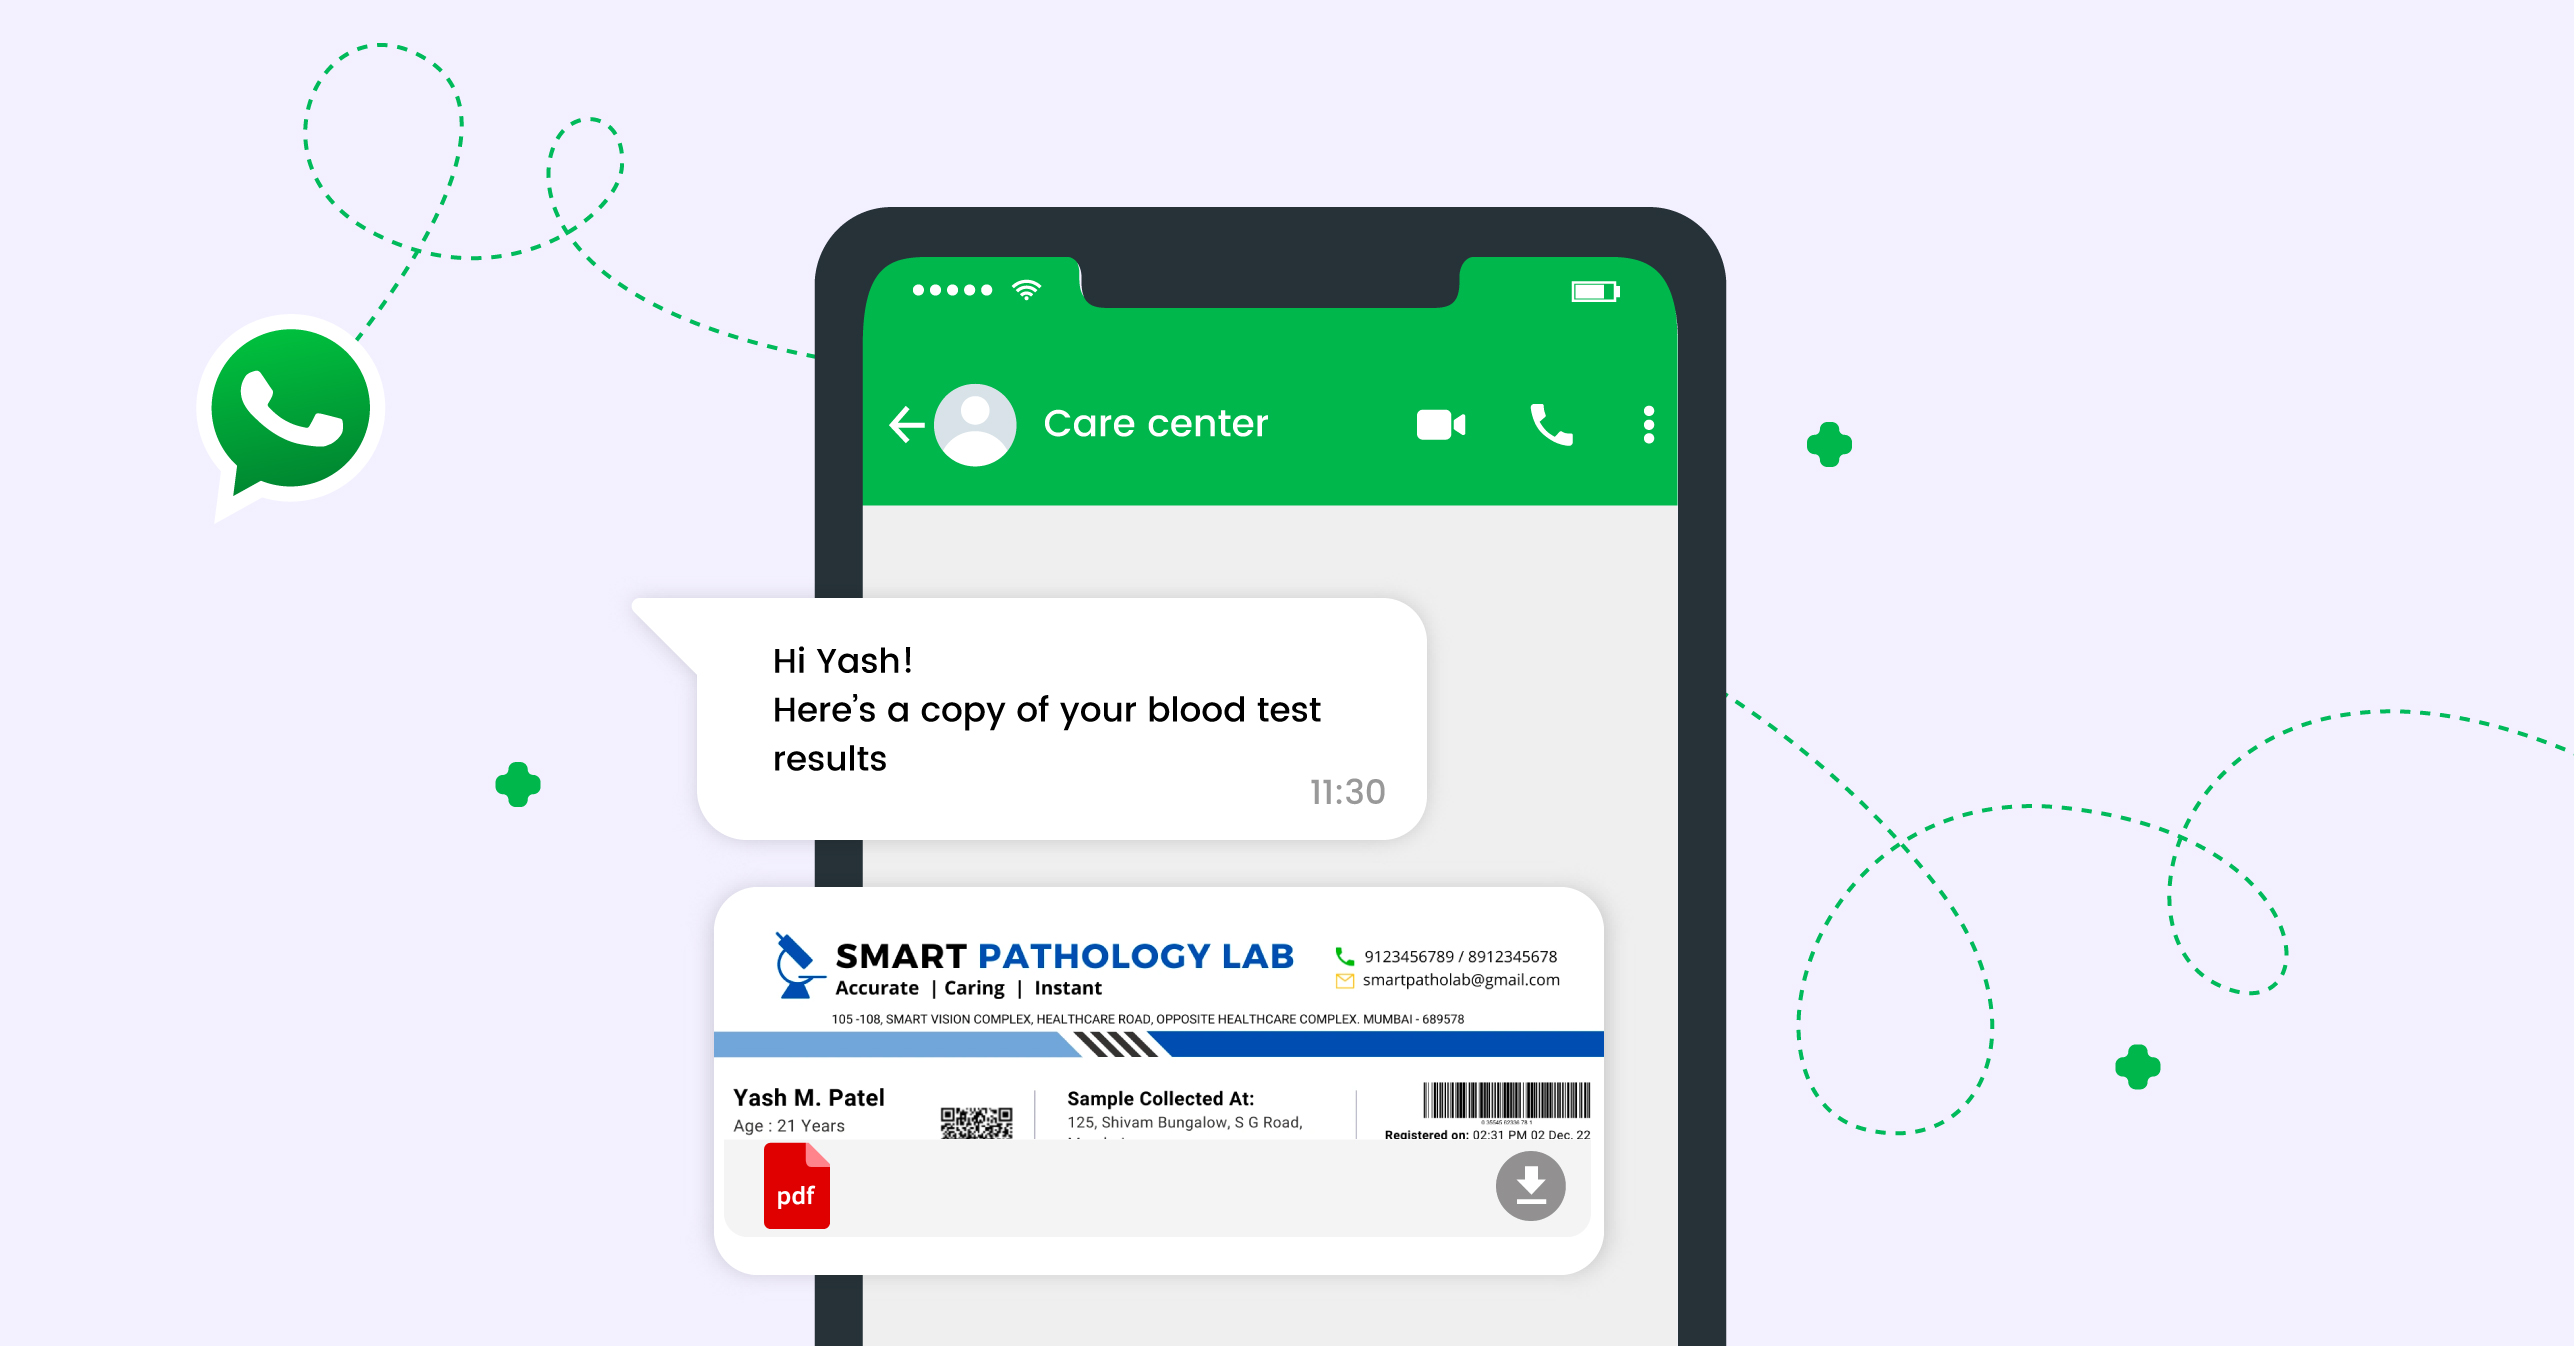 WhatsApp Use Case 6: Test Results Delivery